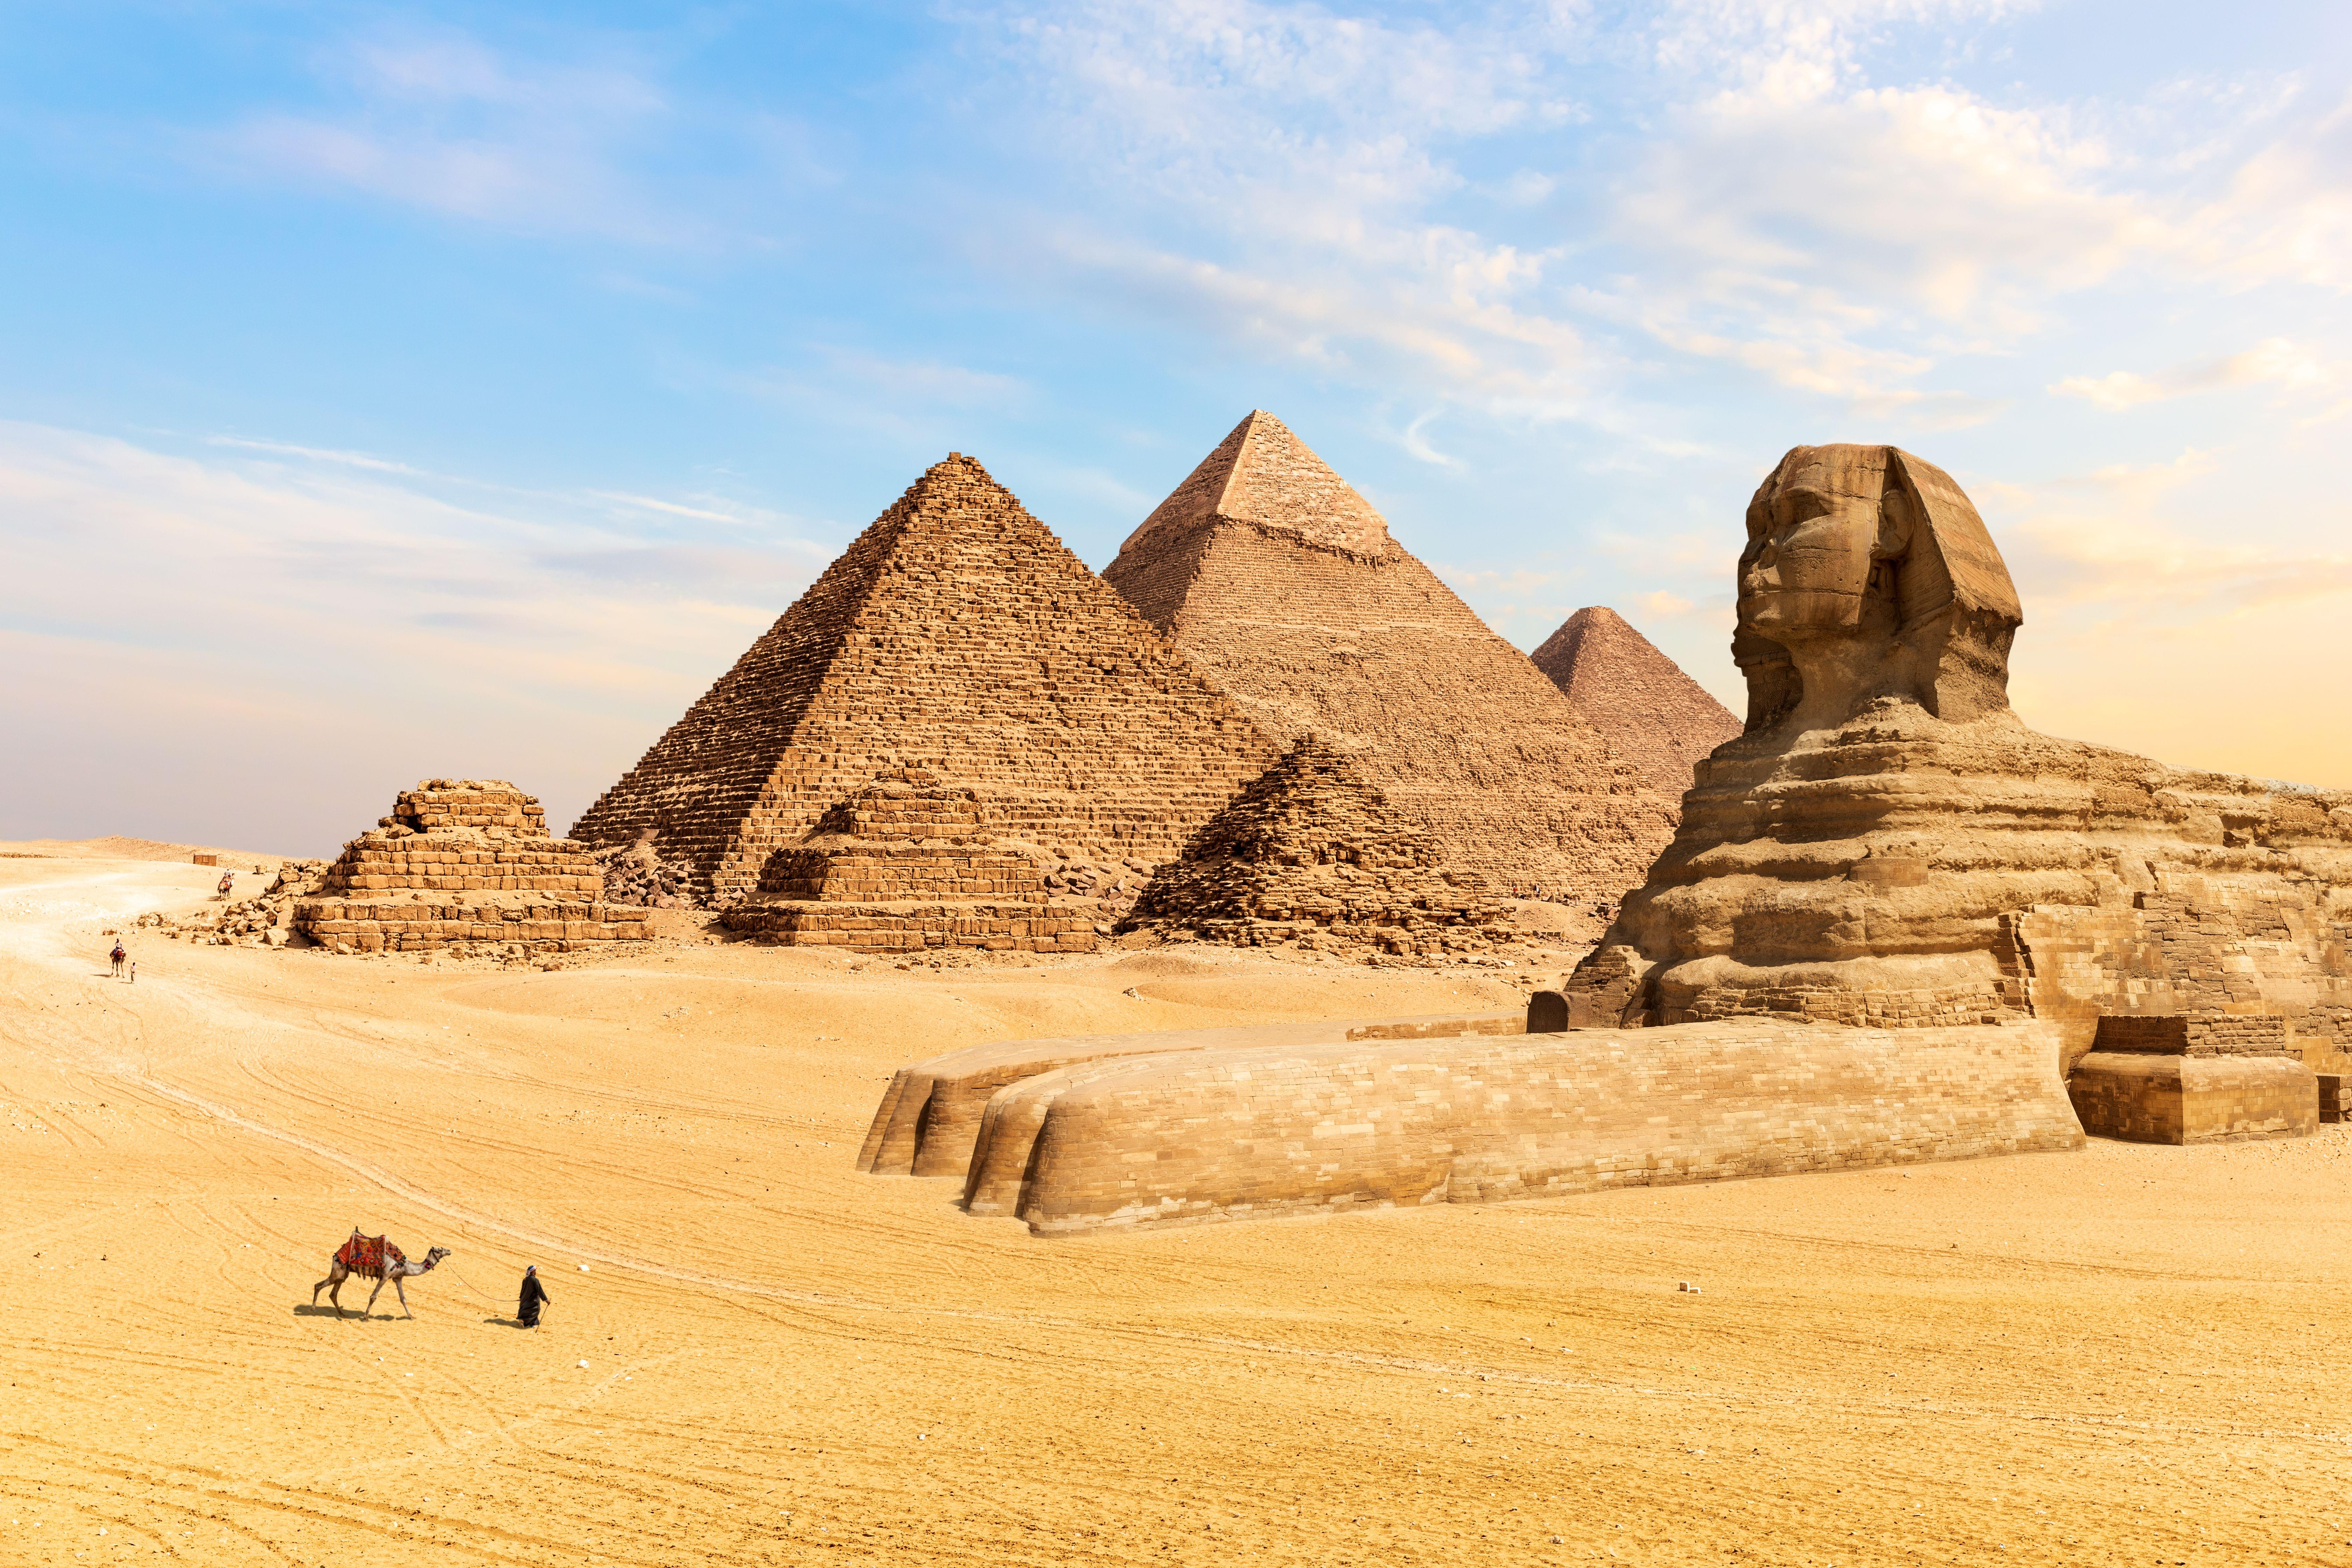 What's Inside the Pyramids of Giza